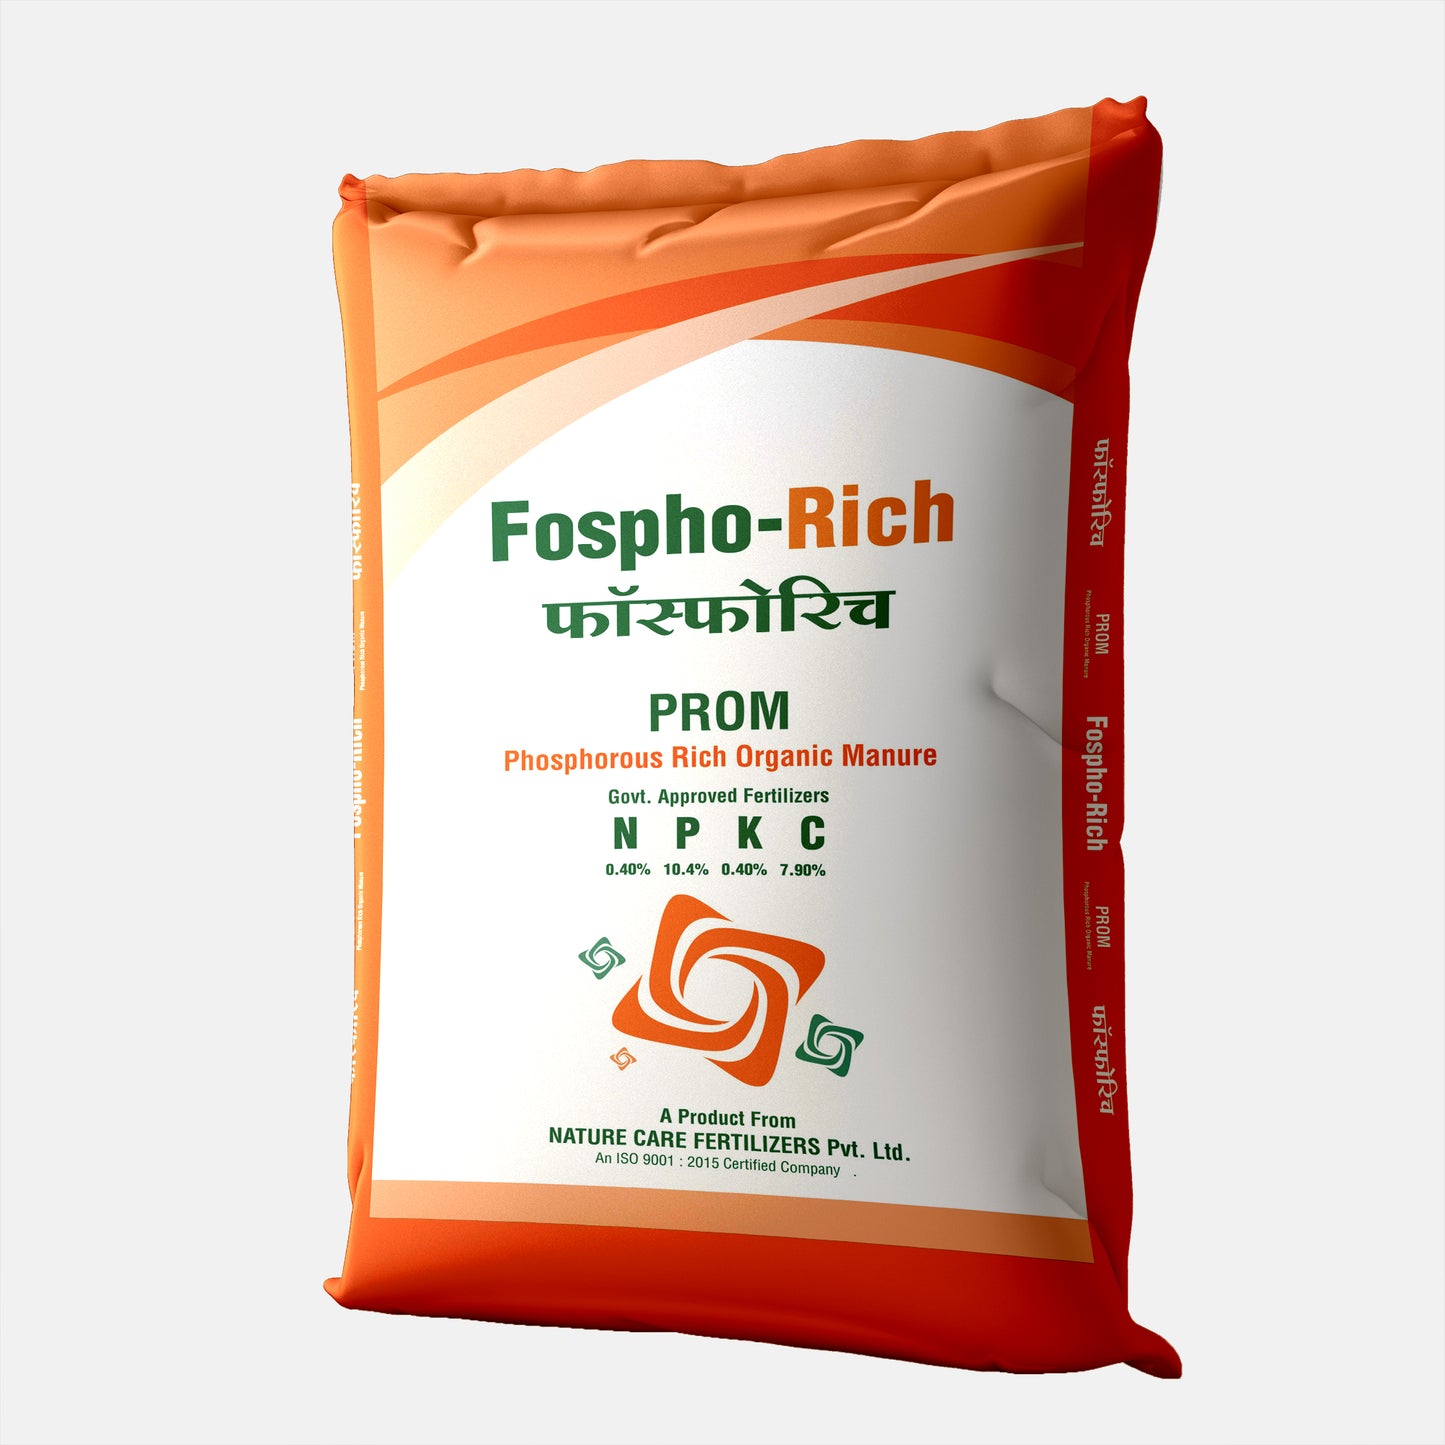 Fospho-Rich Prom